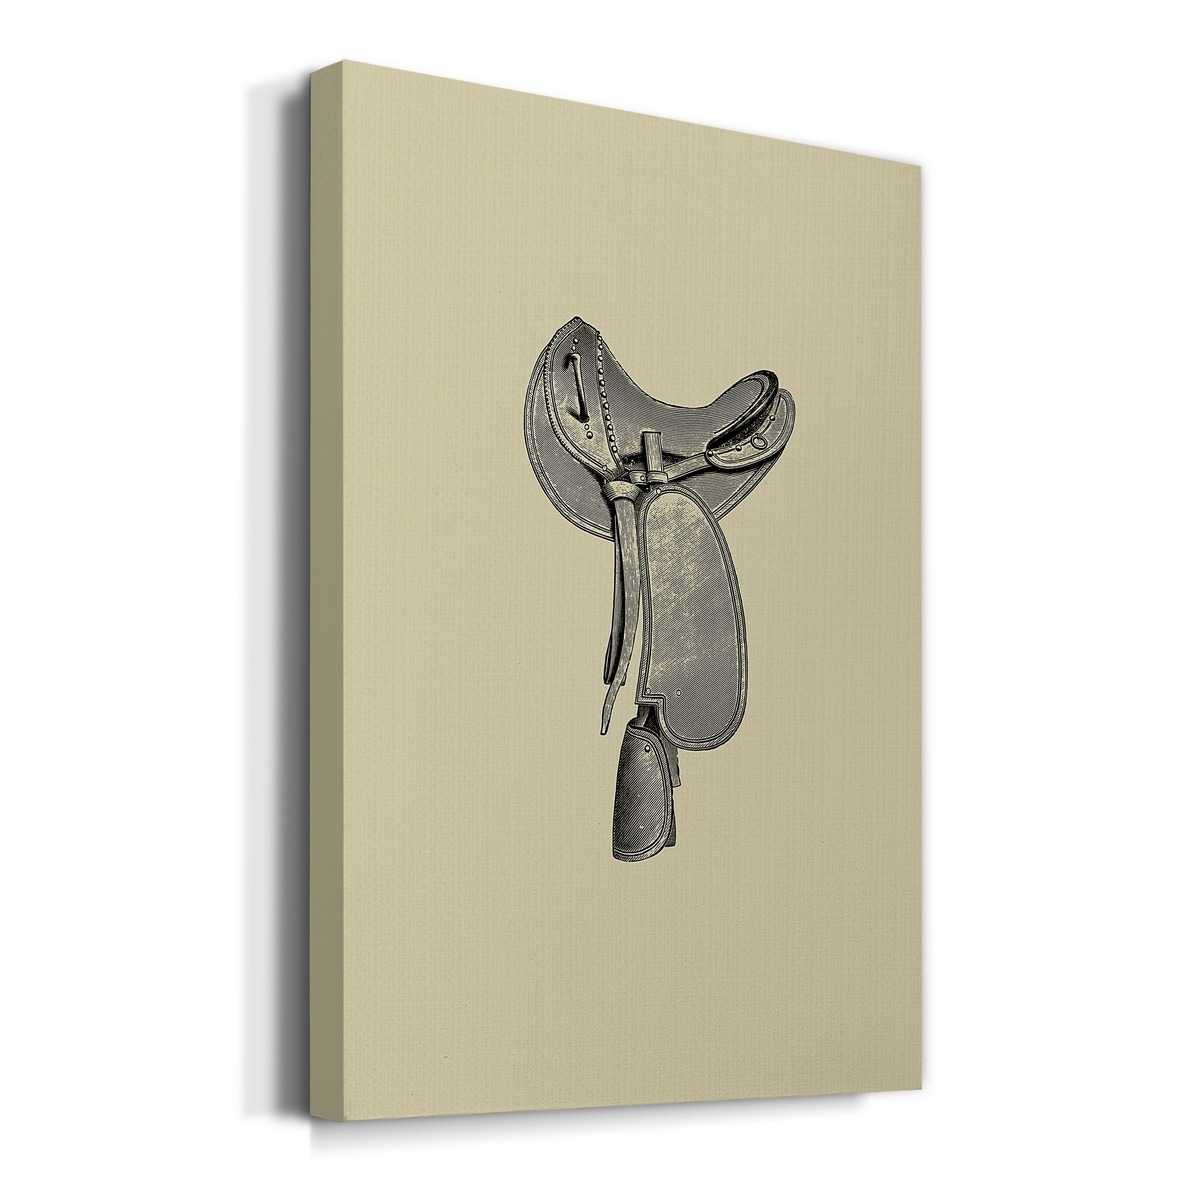 Gallery Wrap Saddle Leather Canvas Art